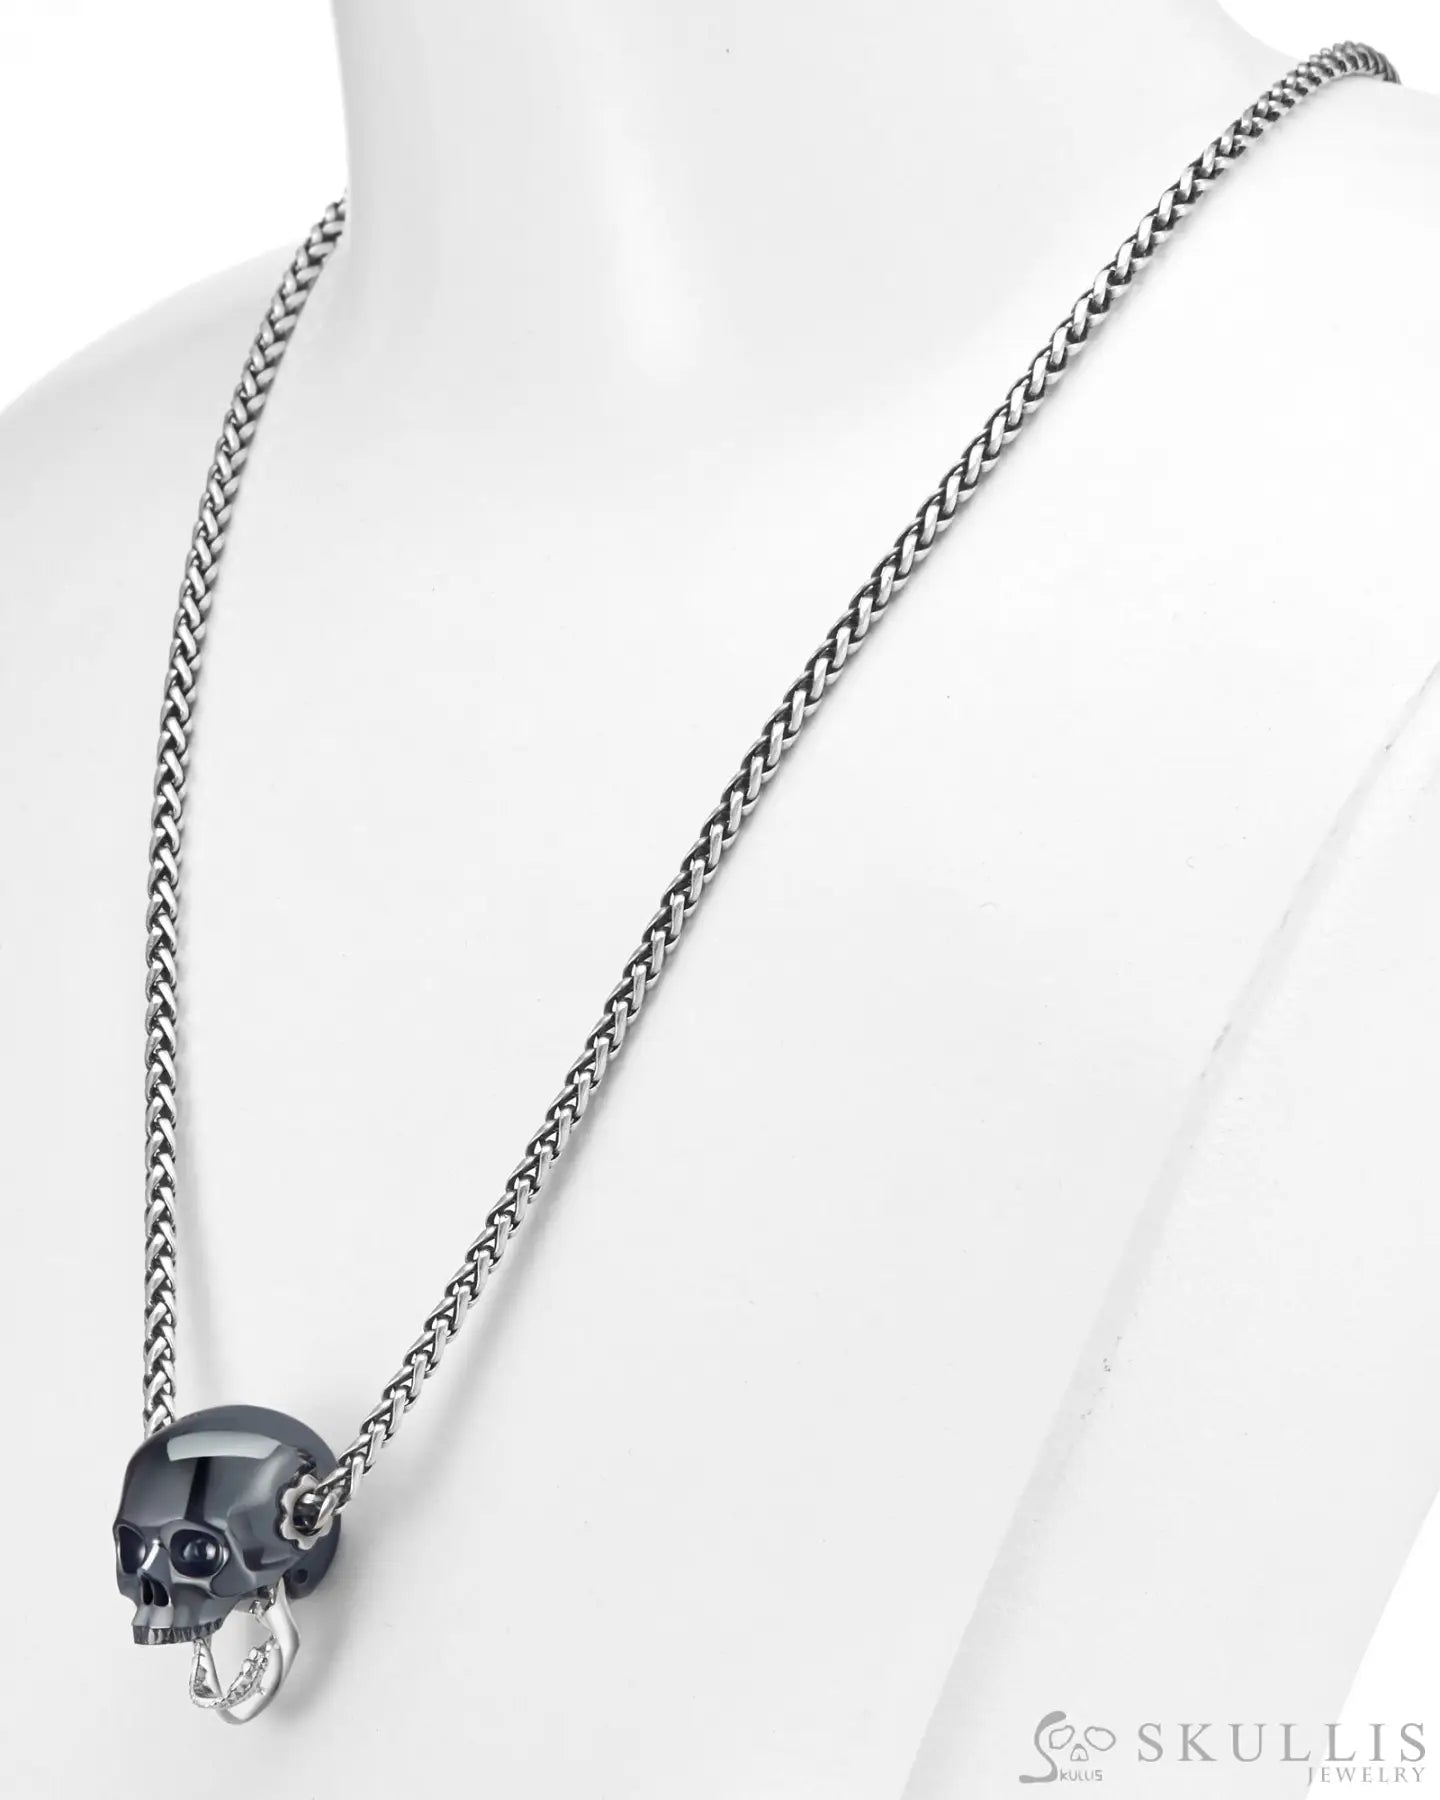 Gem Skull Pendant Necklace Of Hematite Carved Skull With Detachable Silver Jaw In Sterling